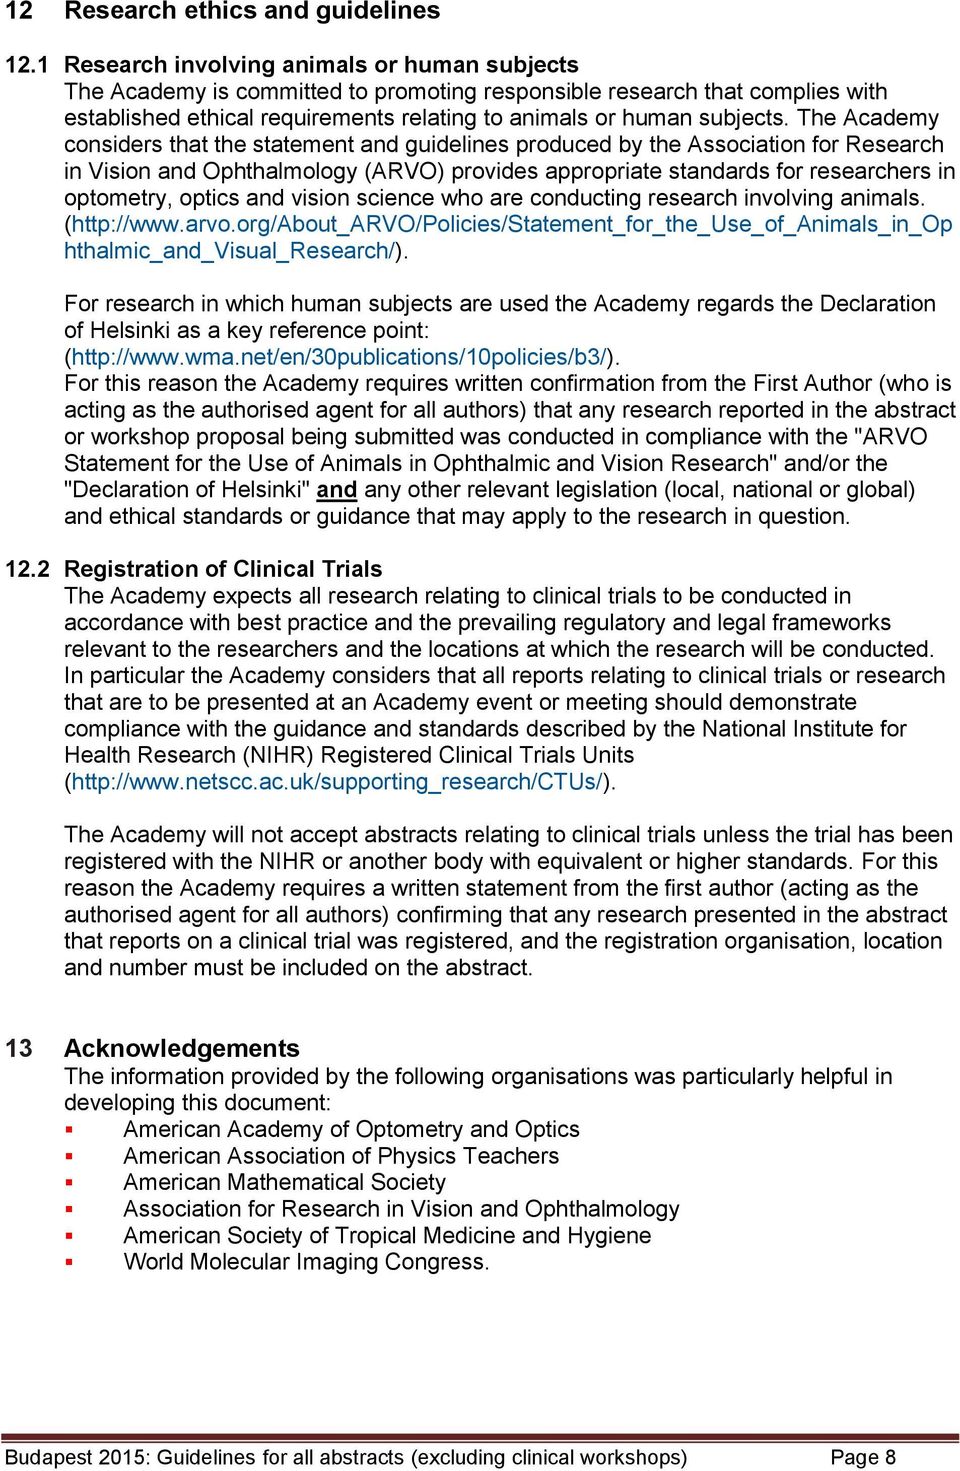 The Academy considers that the statement and guidelines produced by the Association for Research in Vision and Ophthalmology (ARVO) provides appropriate standards for researchers in optometry, optics